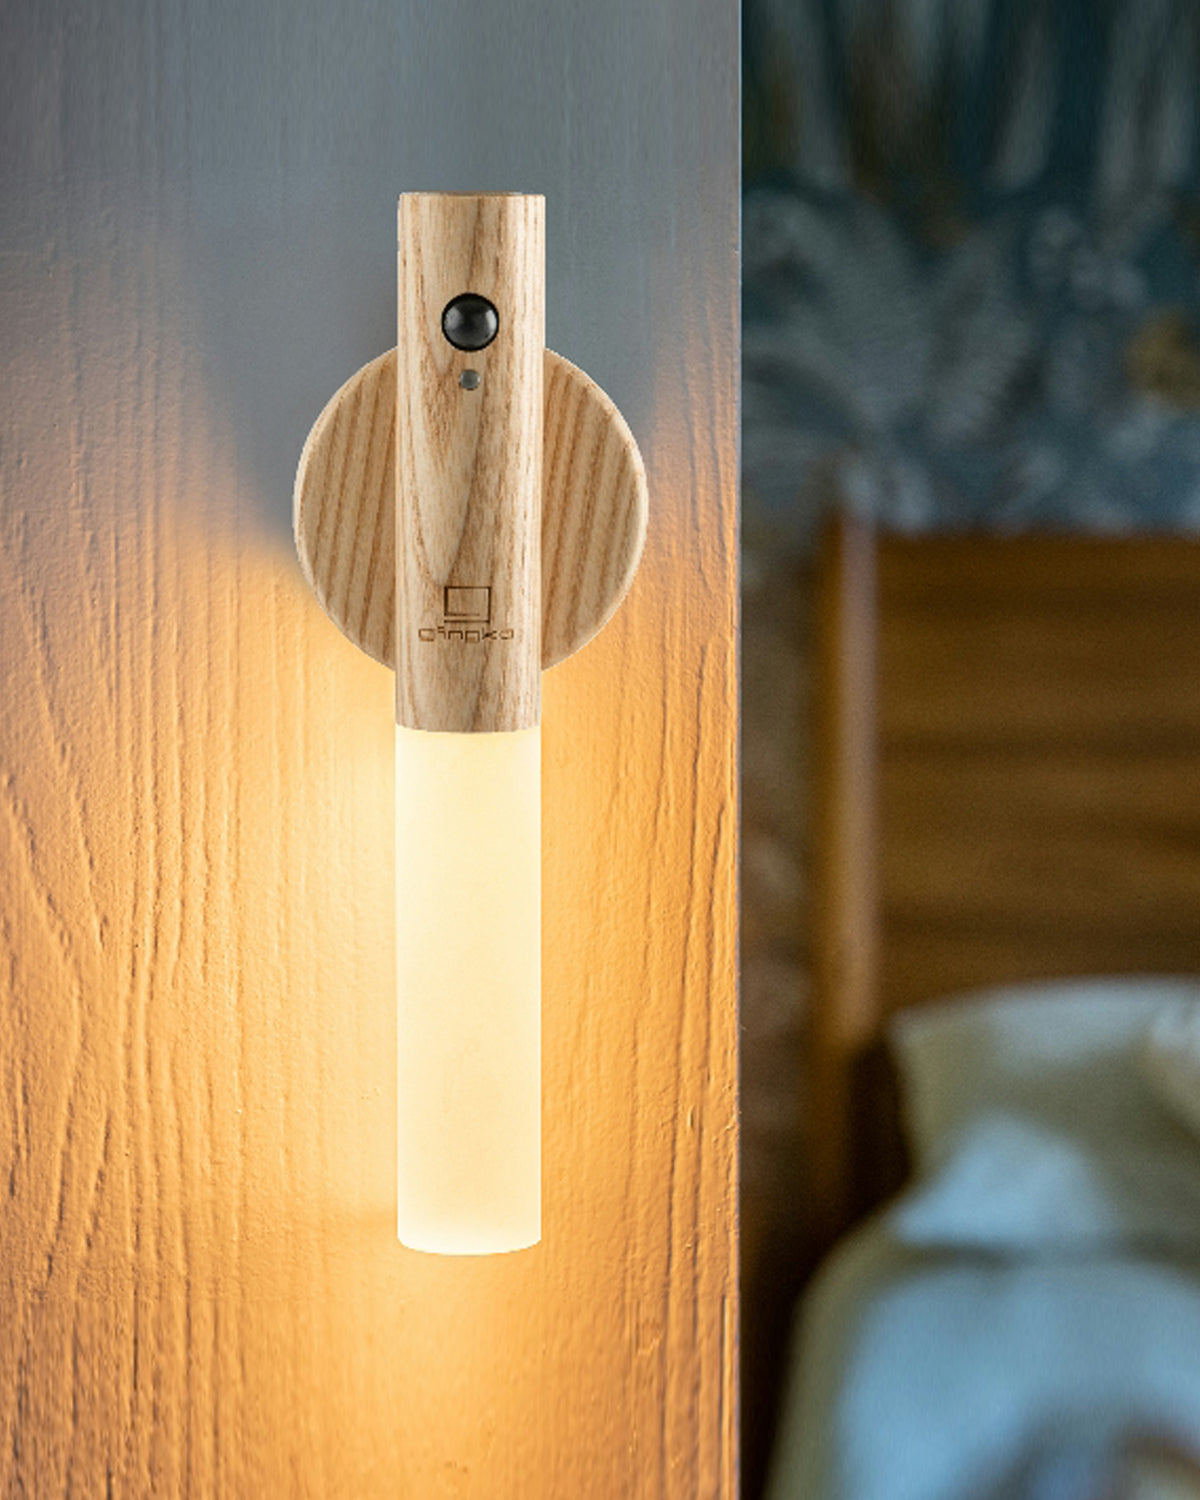 The Smart Baton Light is a sleek, modern, compactly designed light for everyday use - and just perfect for kids!   It can be positioned anywhere you desire. The natural and sustainable adhesive wood base can be fixed to most surfaces, and with a cleverly hidden magnet inside, the light baton can be easily positioned, taken down and even used as a handy portable torch.